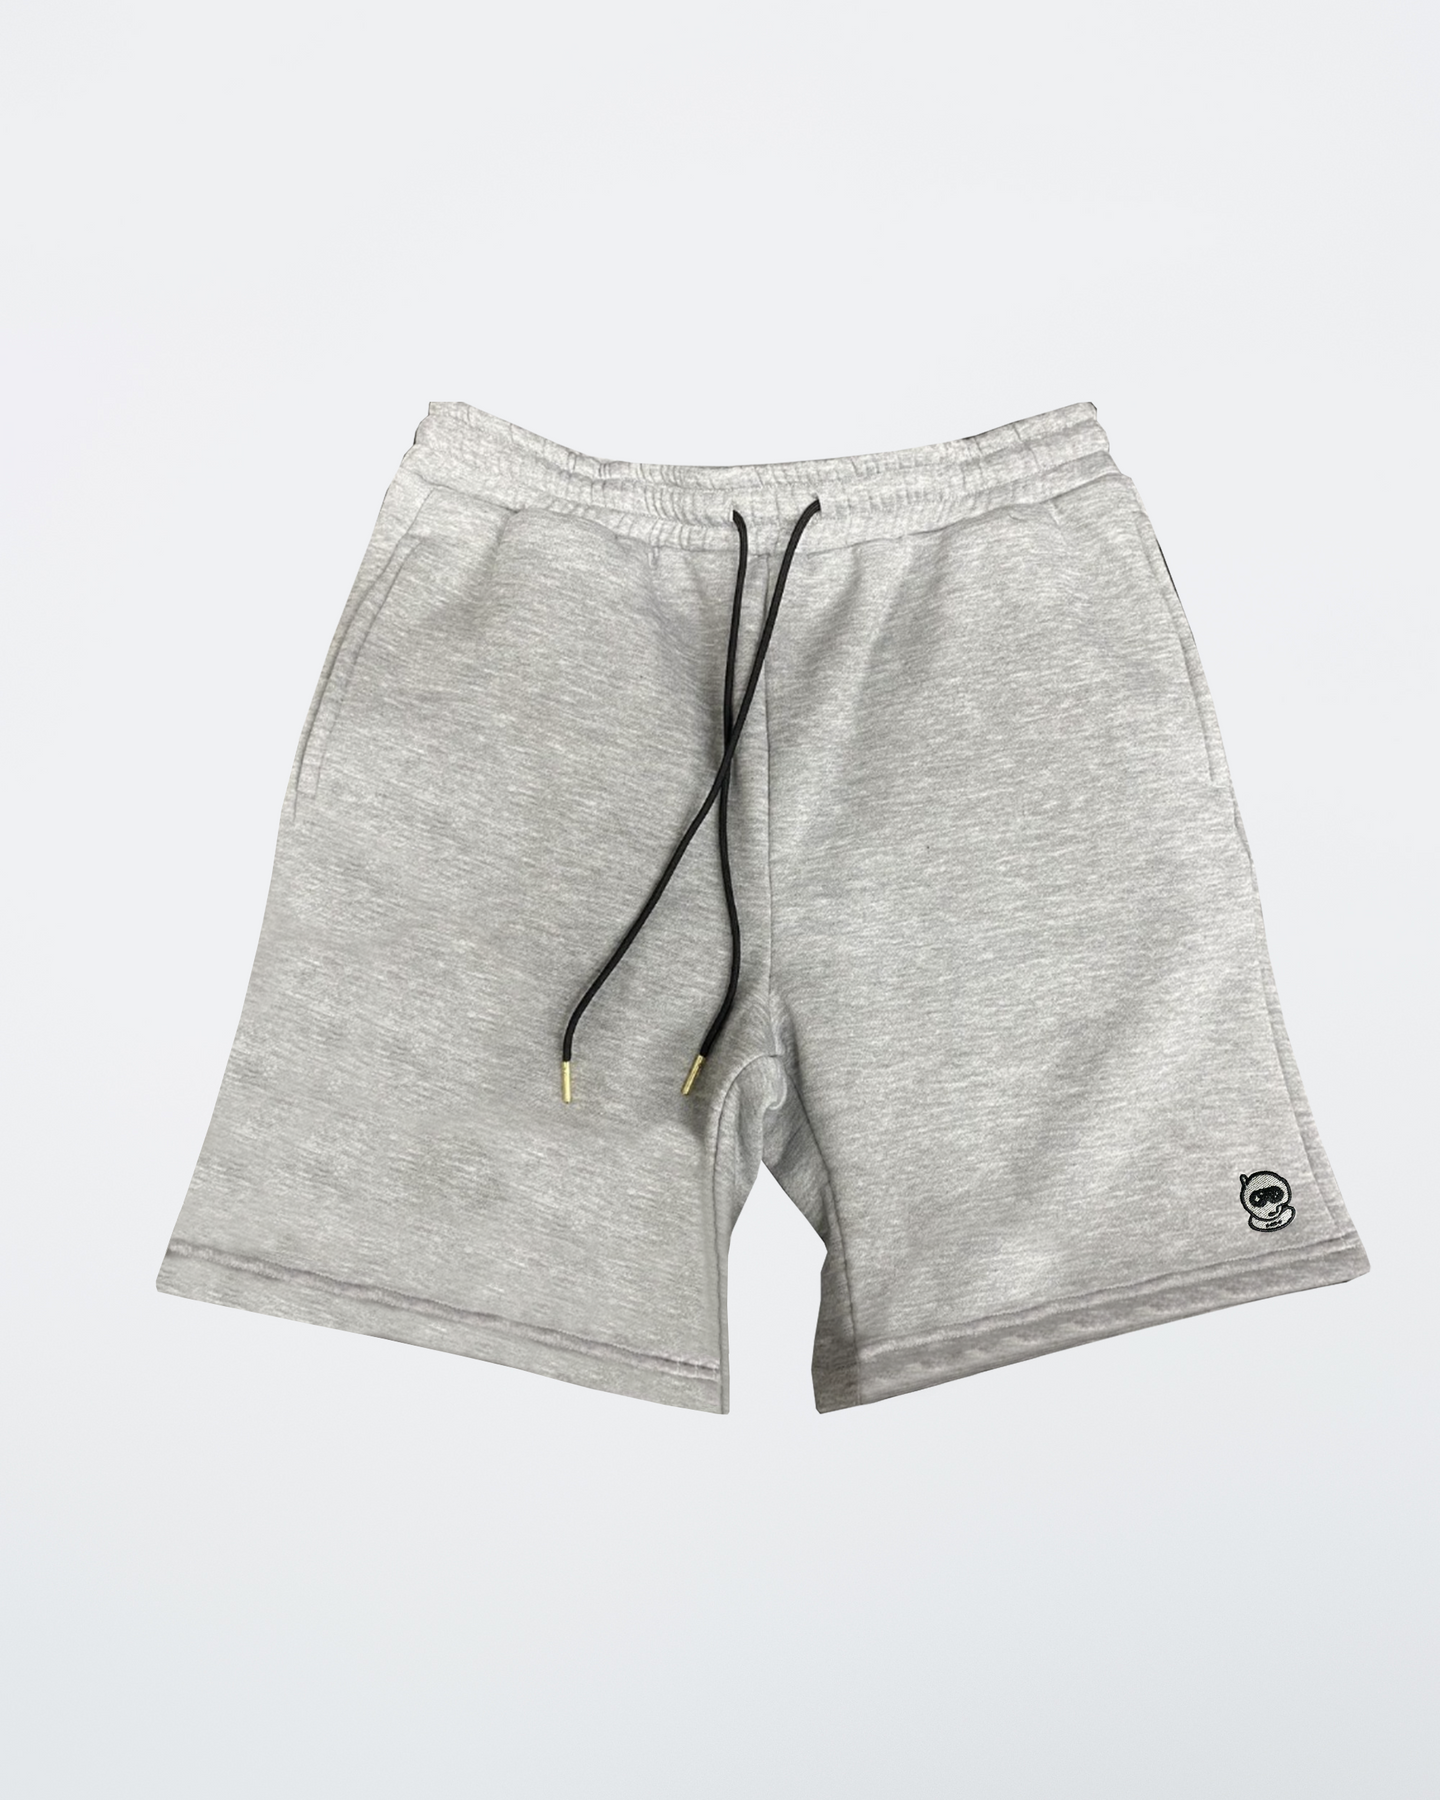 Heather Gray Embroidered Sweatshorts – Spacestation Gaming